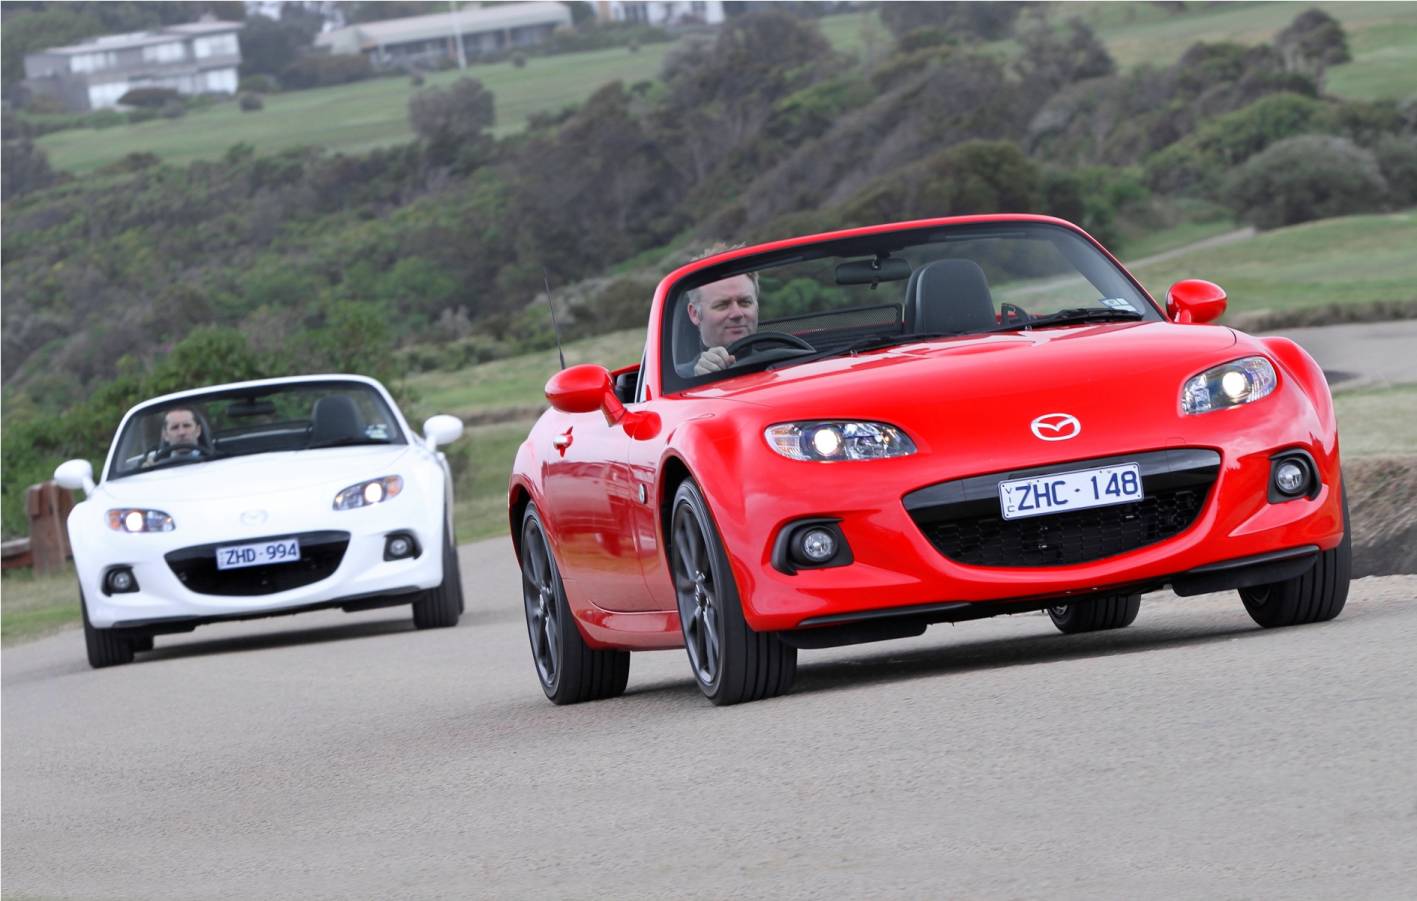 Mazda engineers pushing for more RWD cars – report